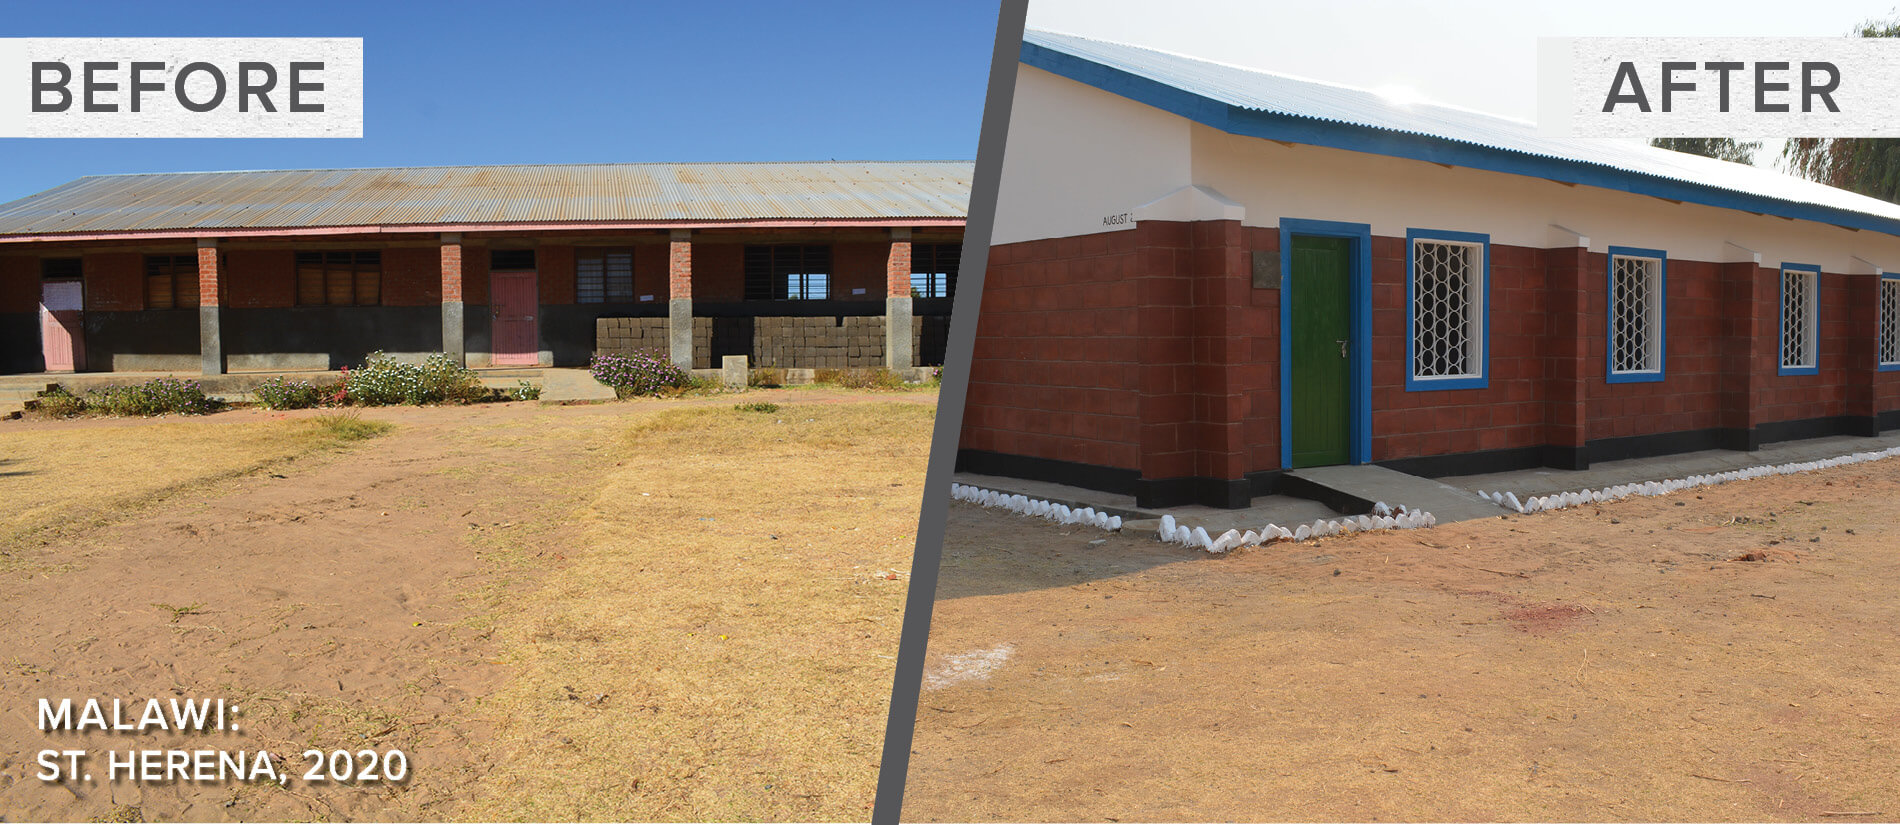 buildOn - St. Herena Malawi - Before and After_1900x825 -Dual Concept - 2021 (1)